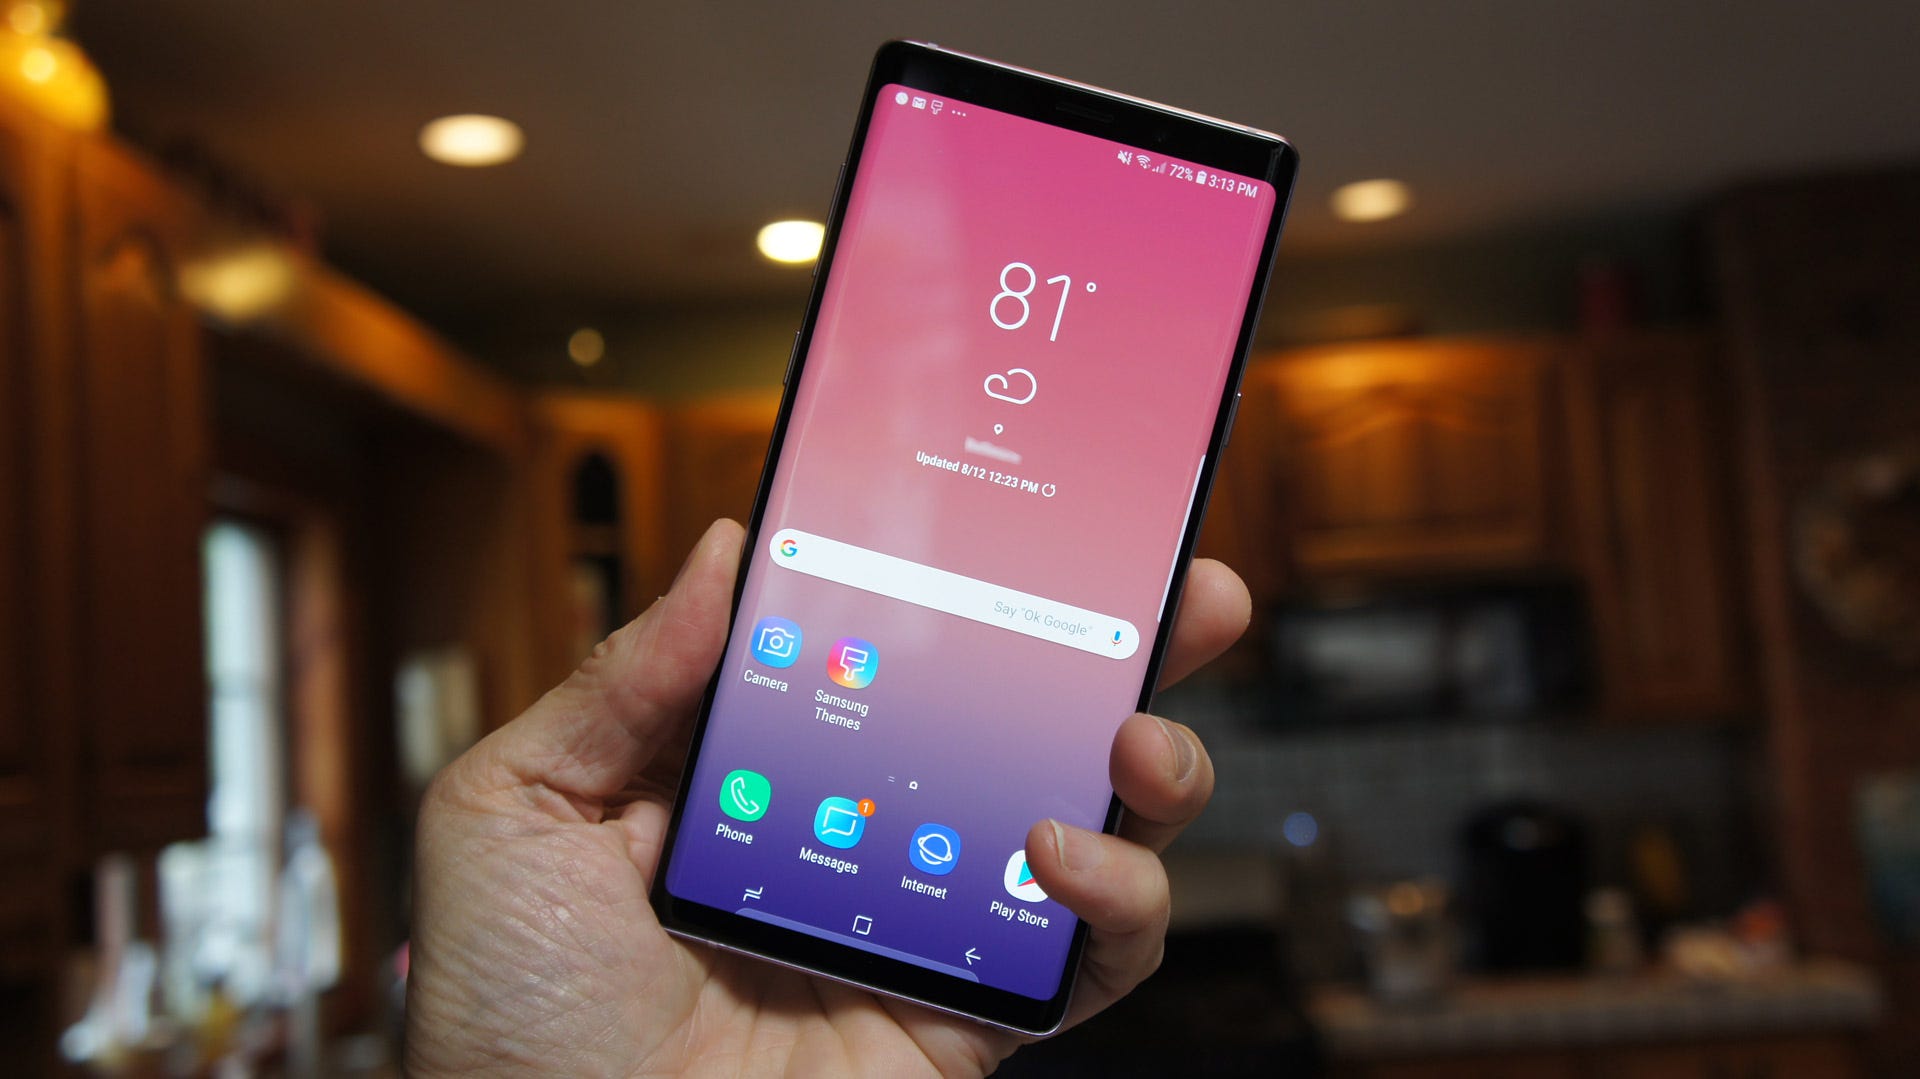 Samsung Galaxy Note 9 Is Everything You Want Android To Be Except